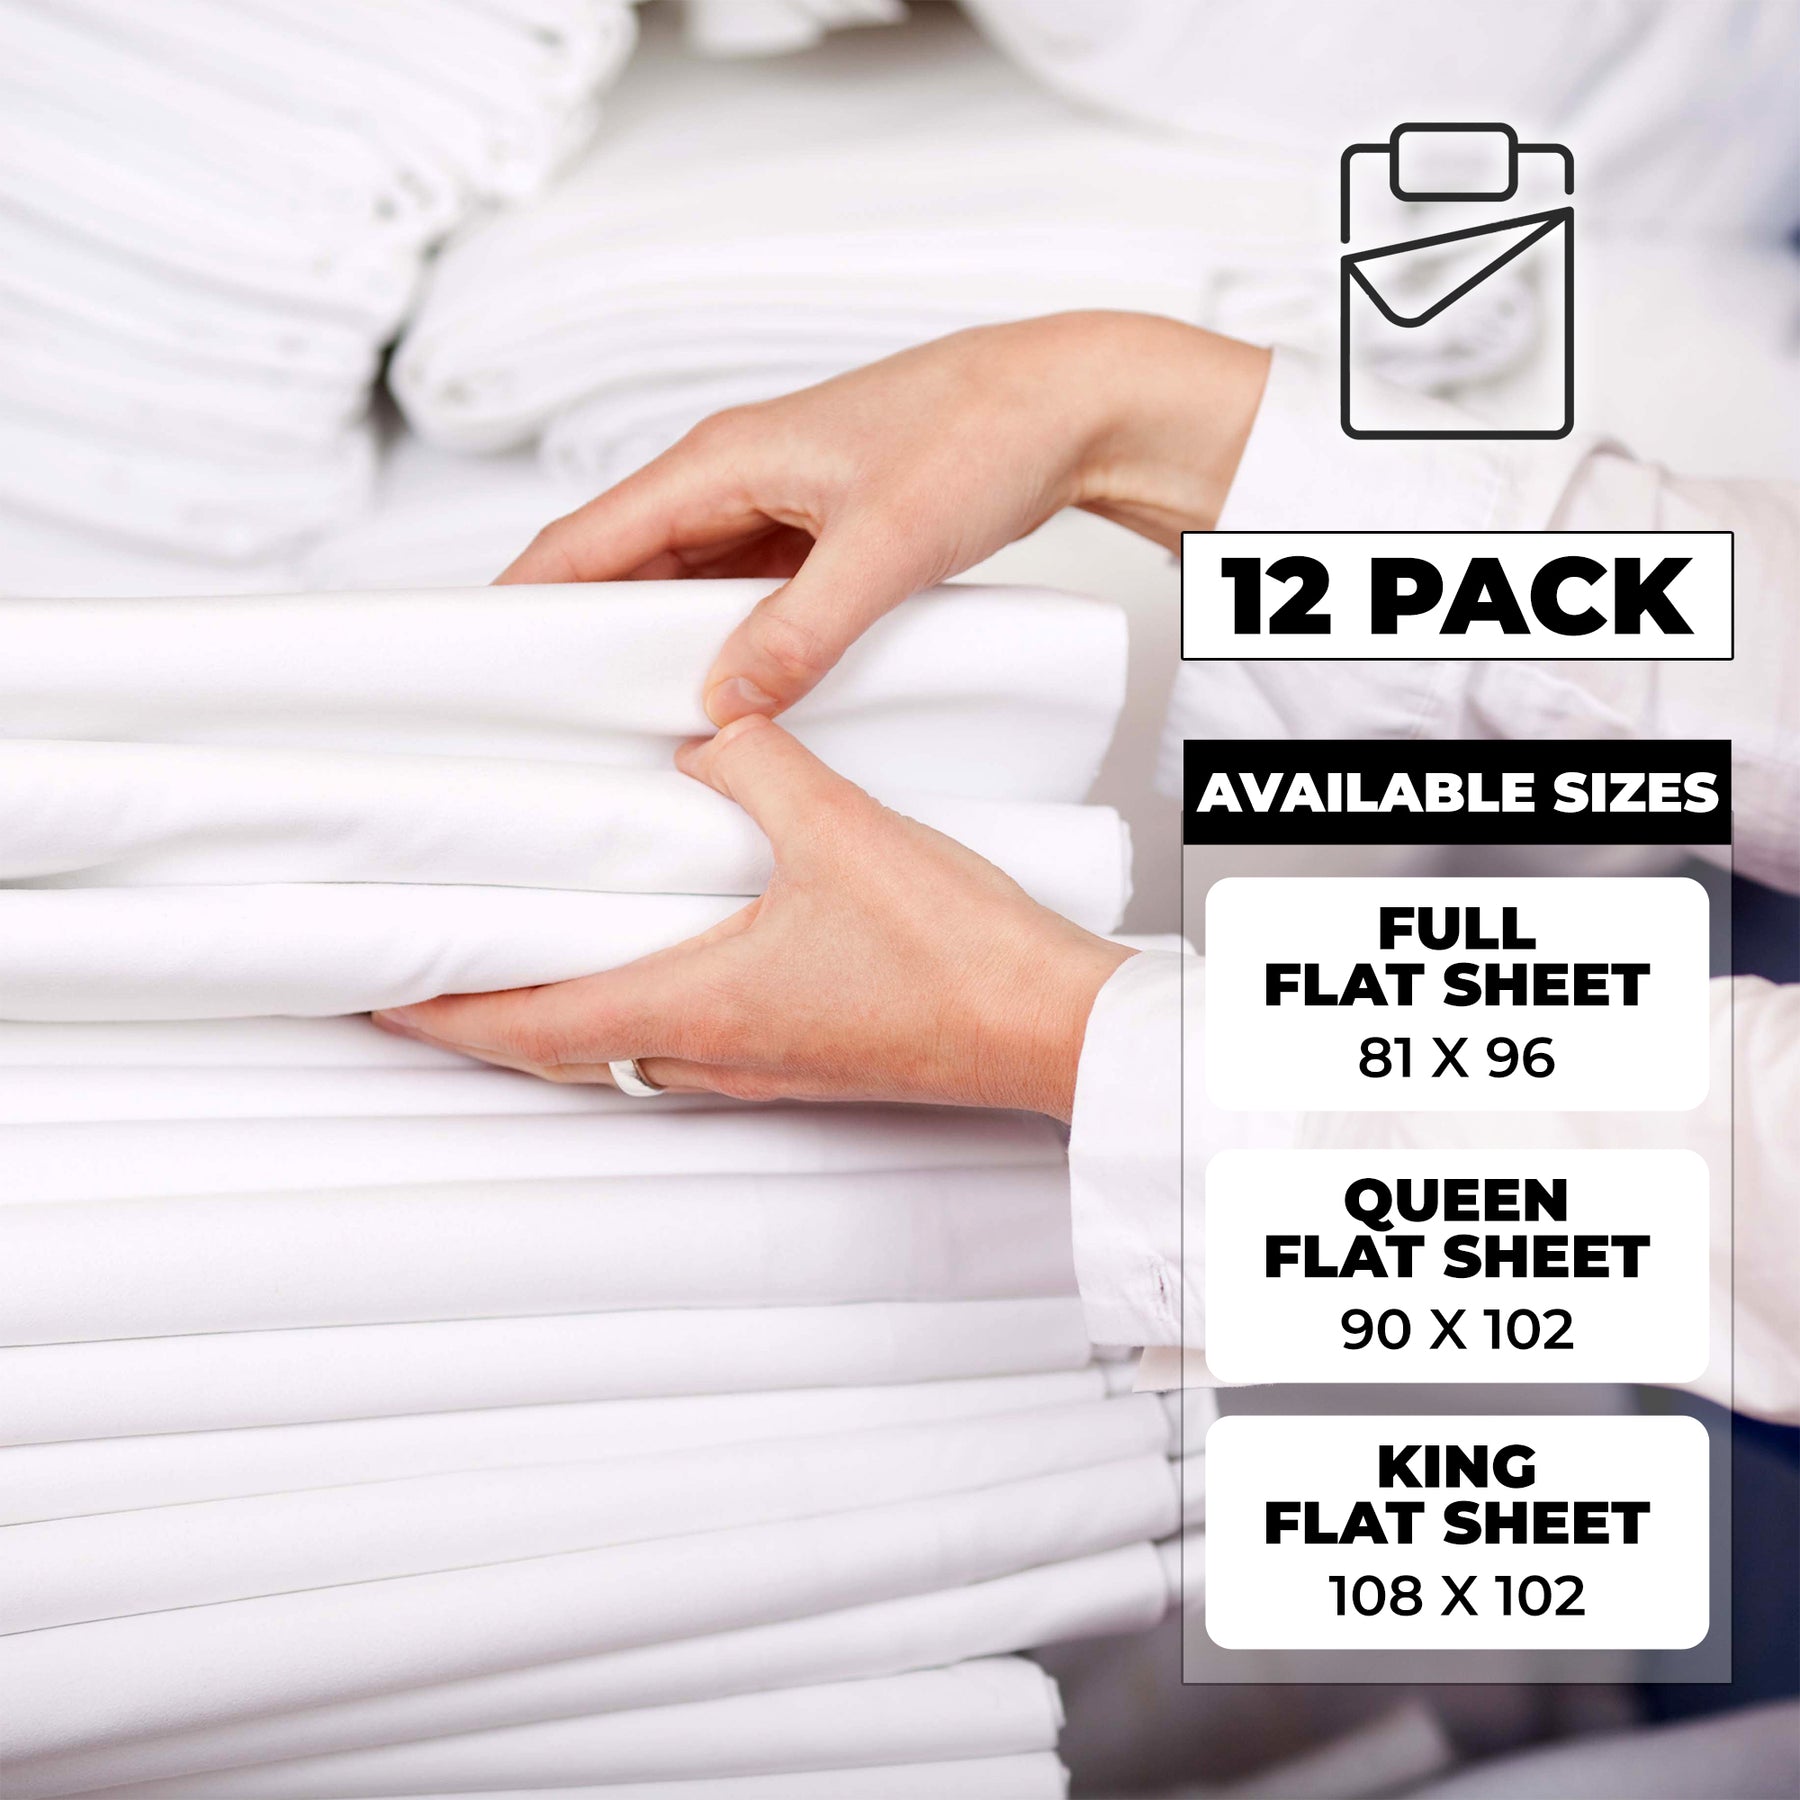 Cotton Rich Percale Hotel Quality Flat Bed Sheets Set Of 3, 6, 12 - White